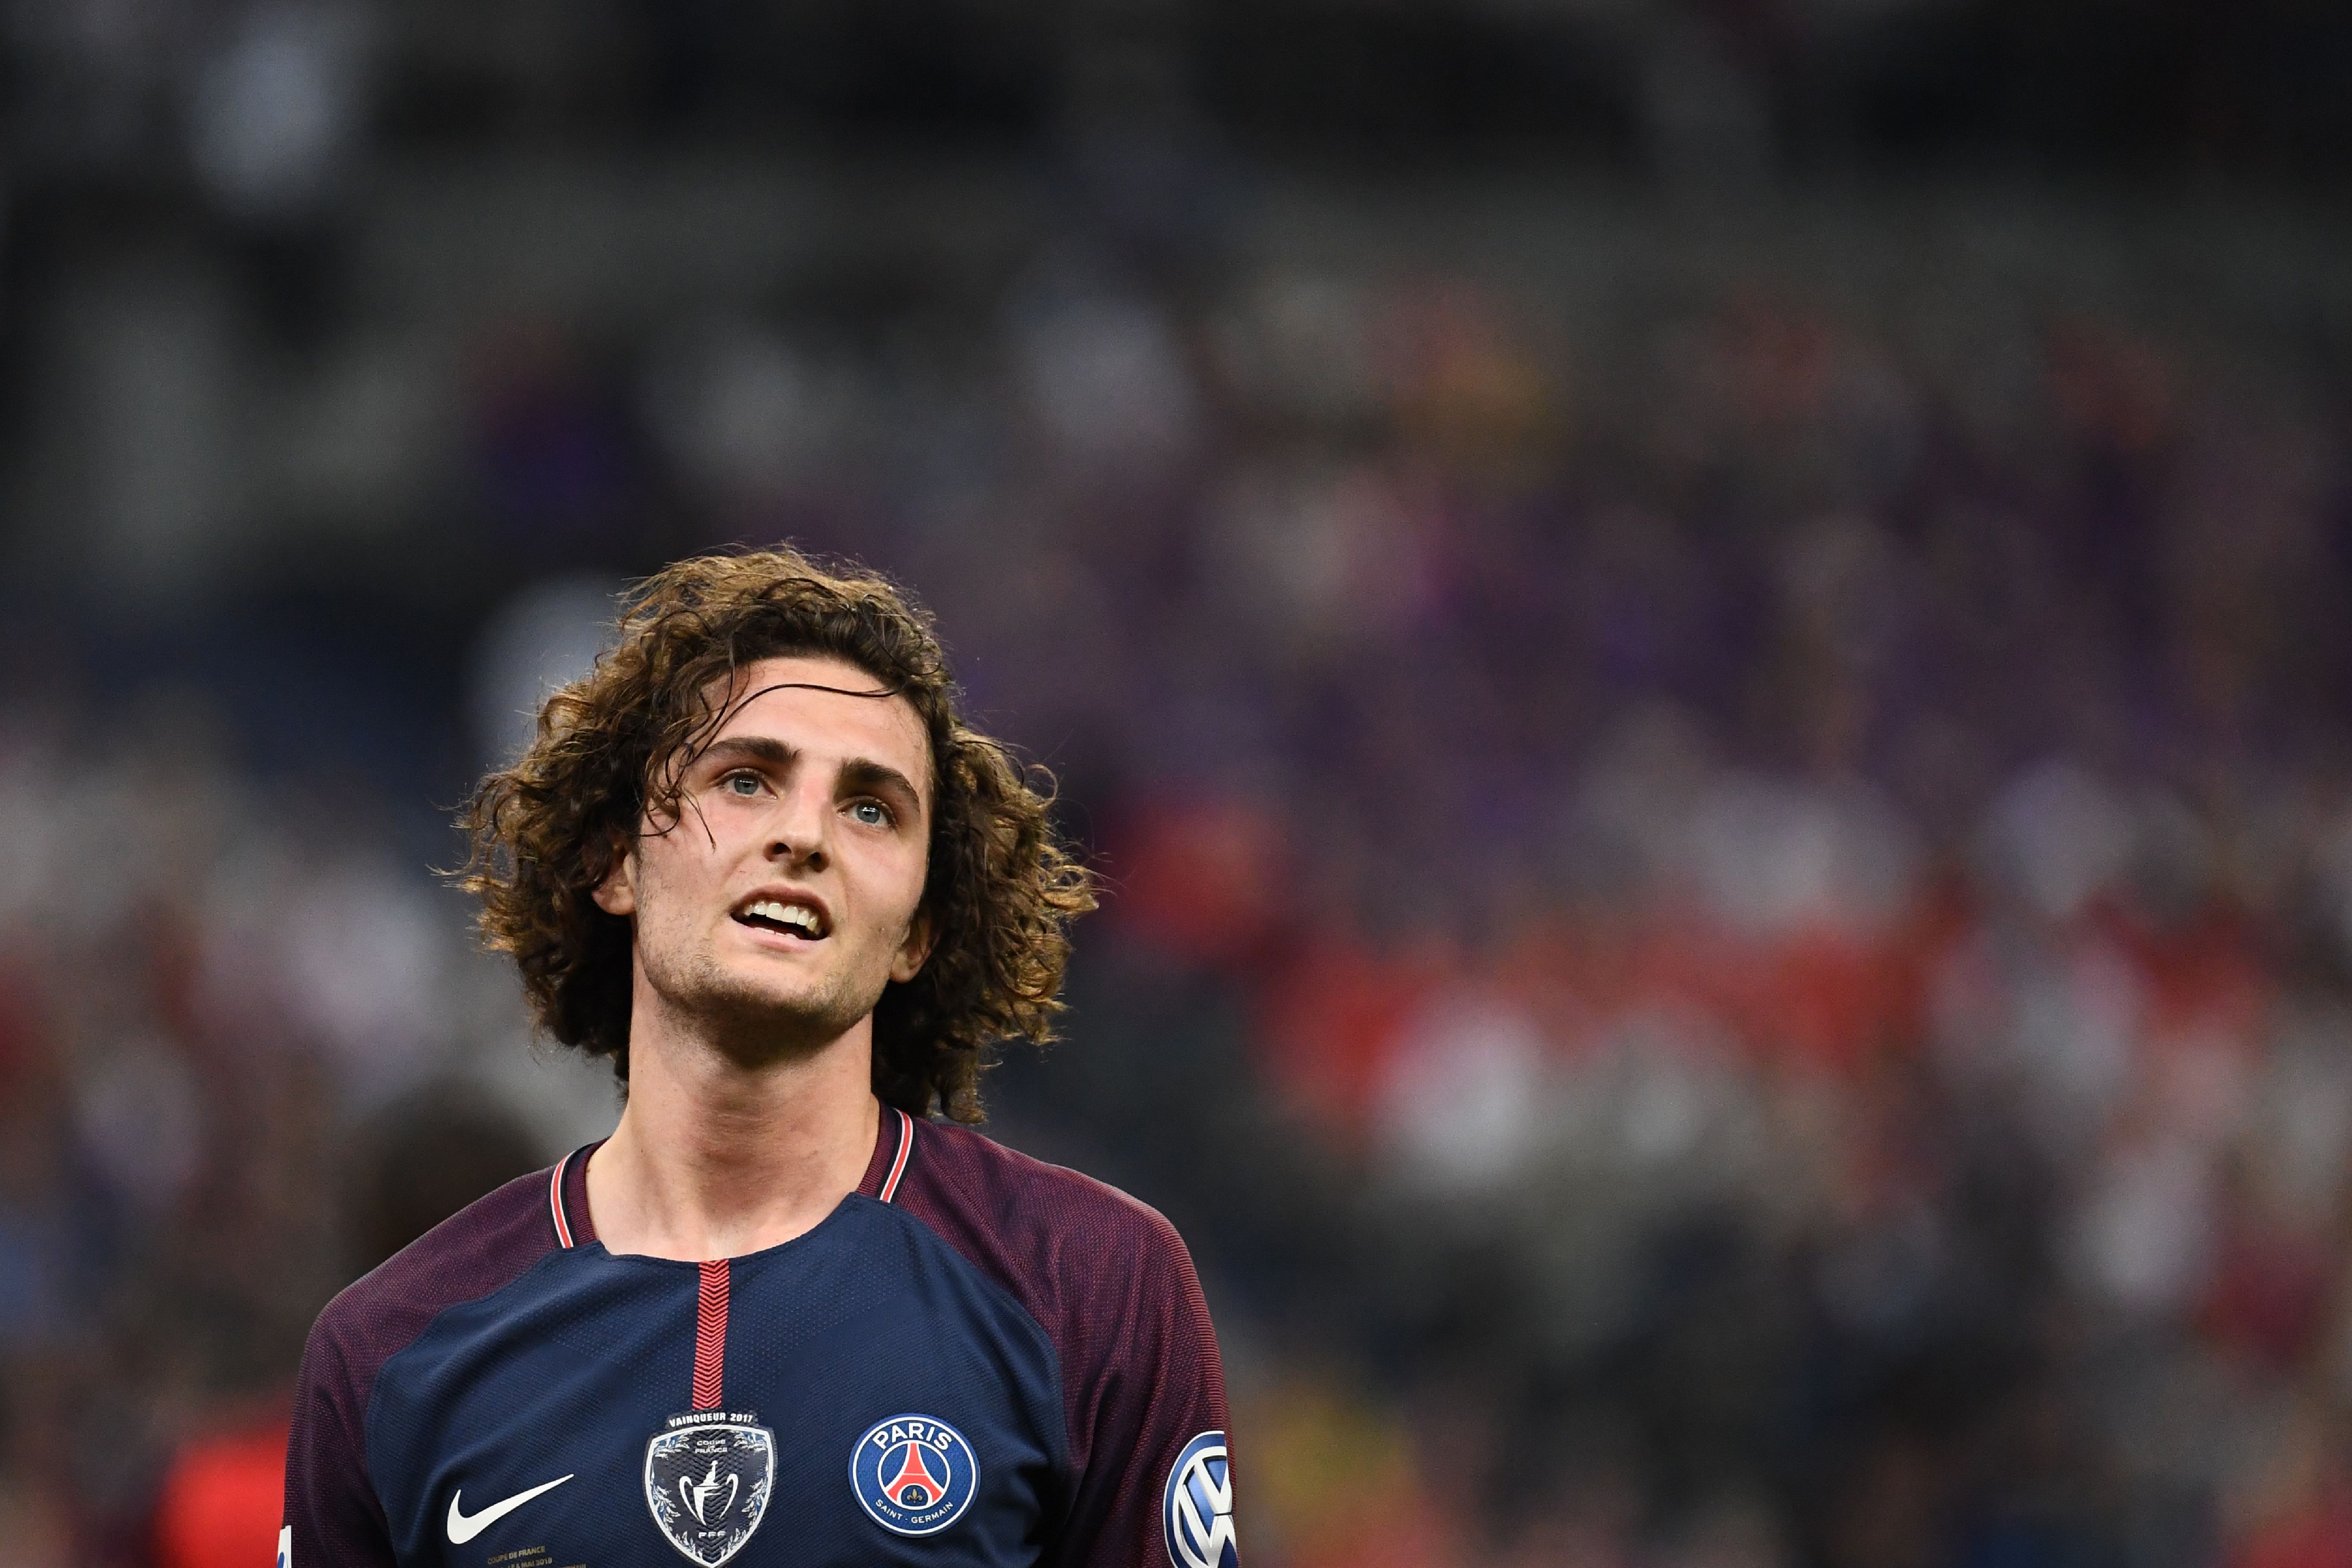 Can Manchester United convince Rabiot to join their project? (Picture Courtesy - AFP/Getty Images)